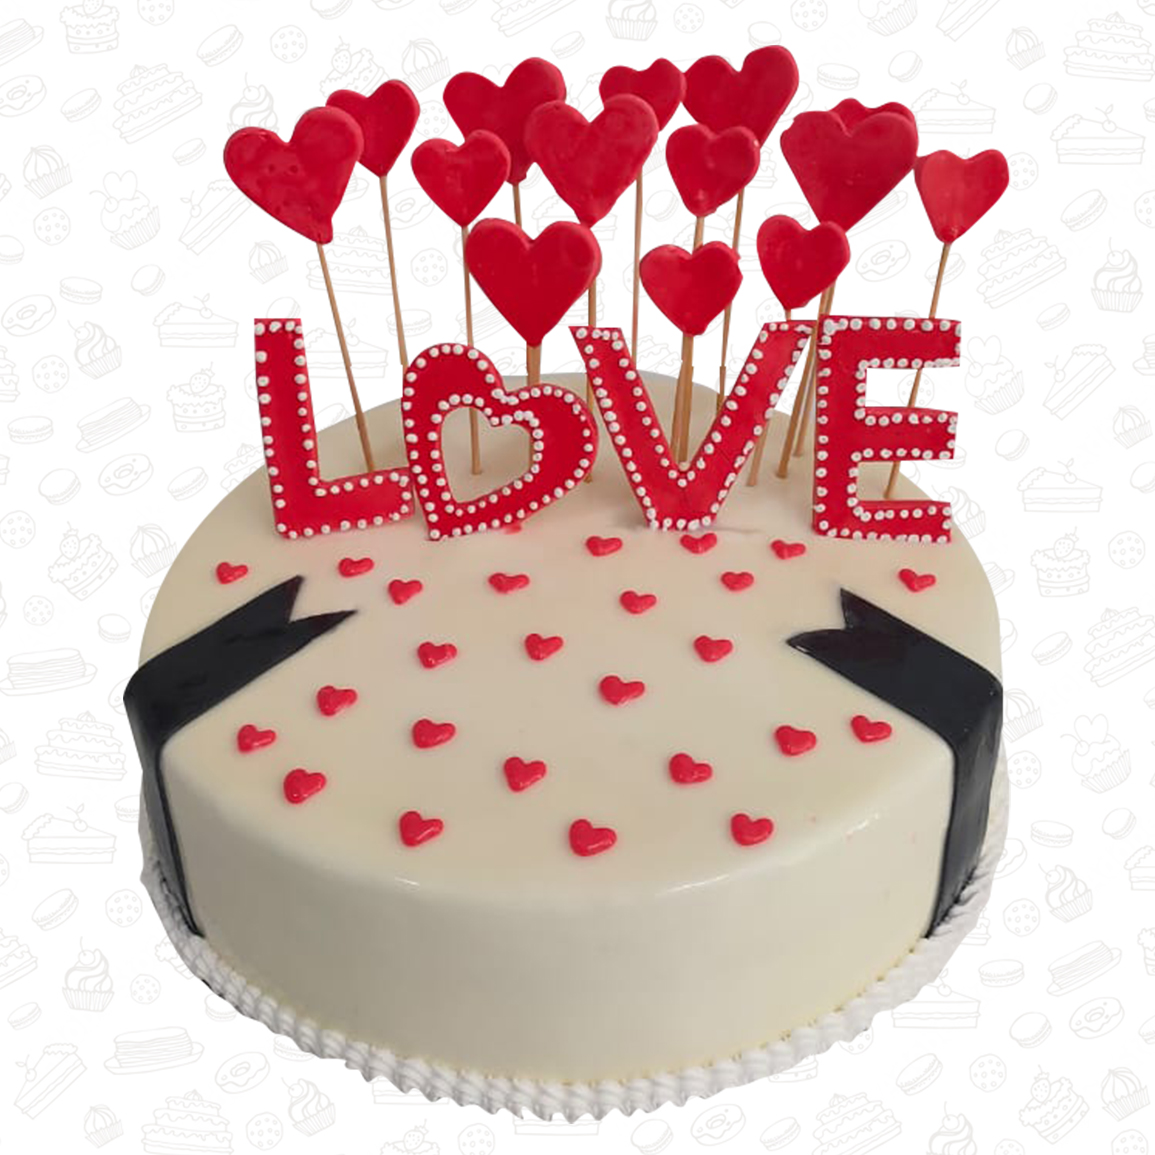 All Occasion Cakes - Valentines Day Heart Cake